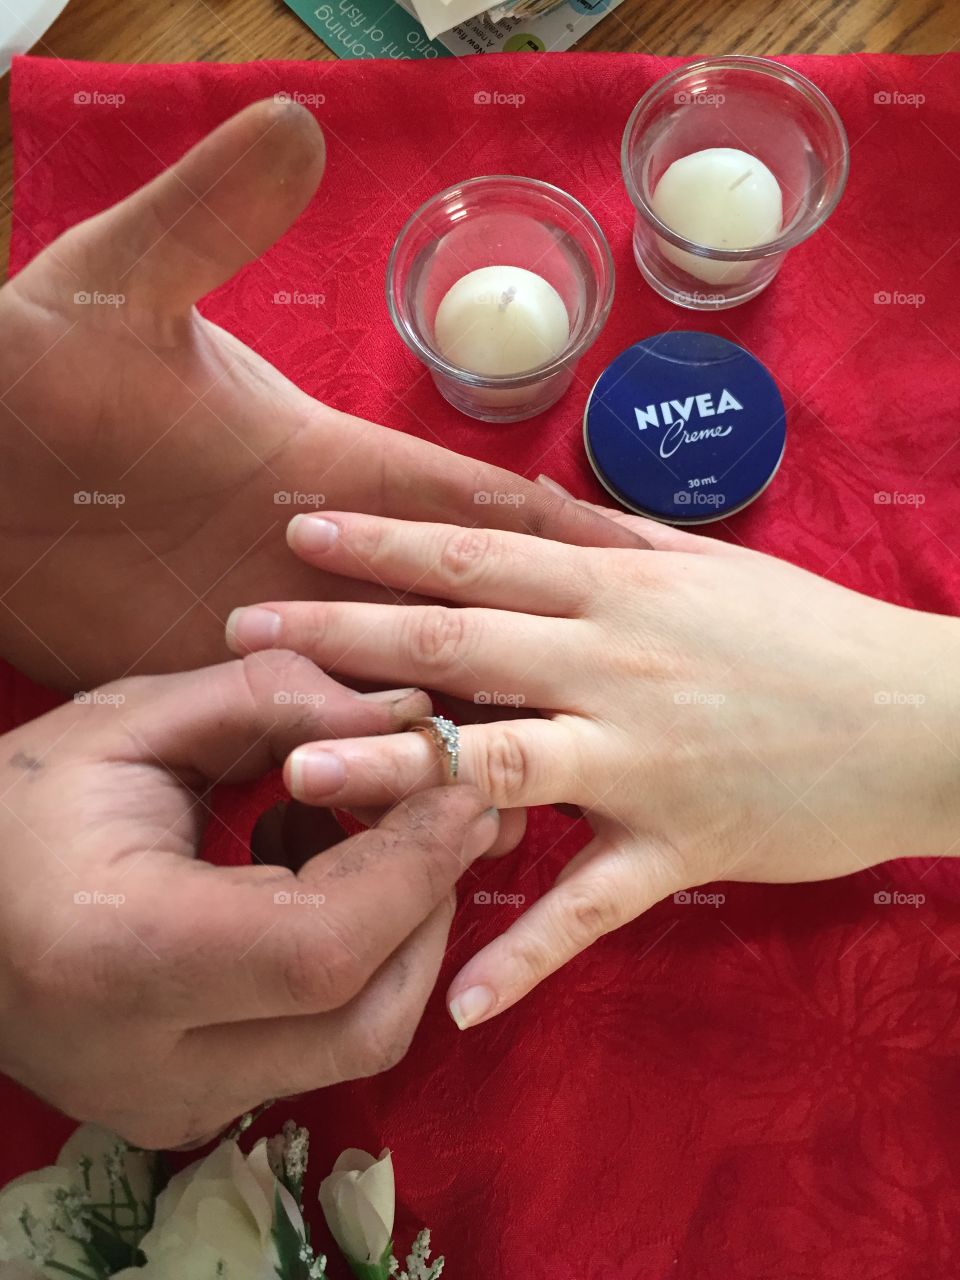 We love  Nivea cream Softens even the hardest working hands before he proposes to a soulmate.